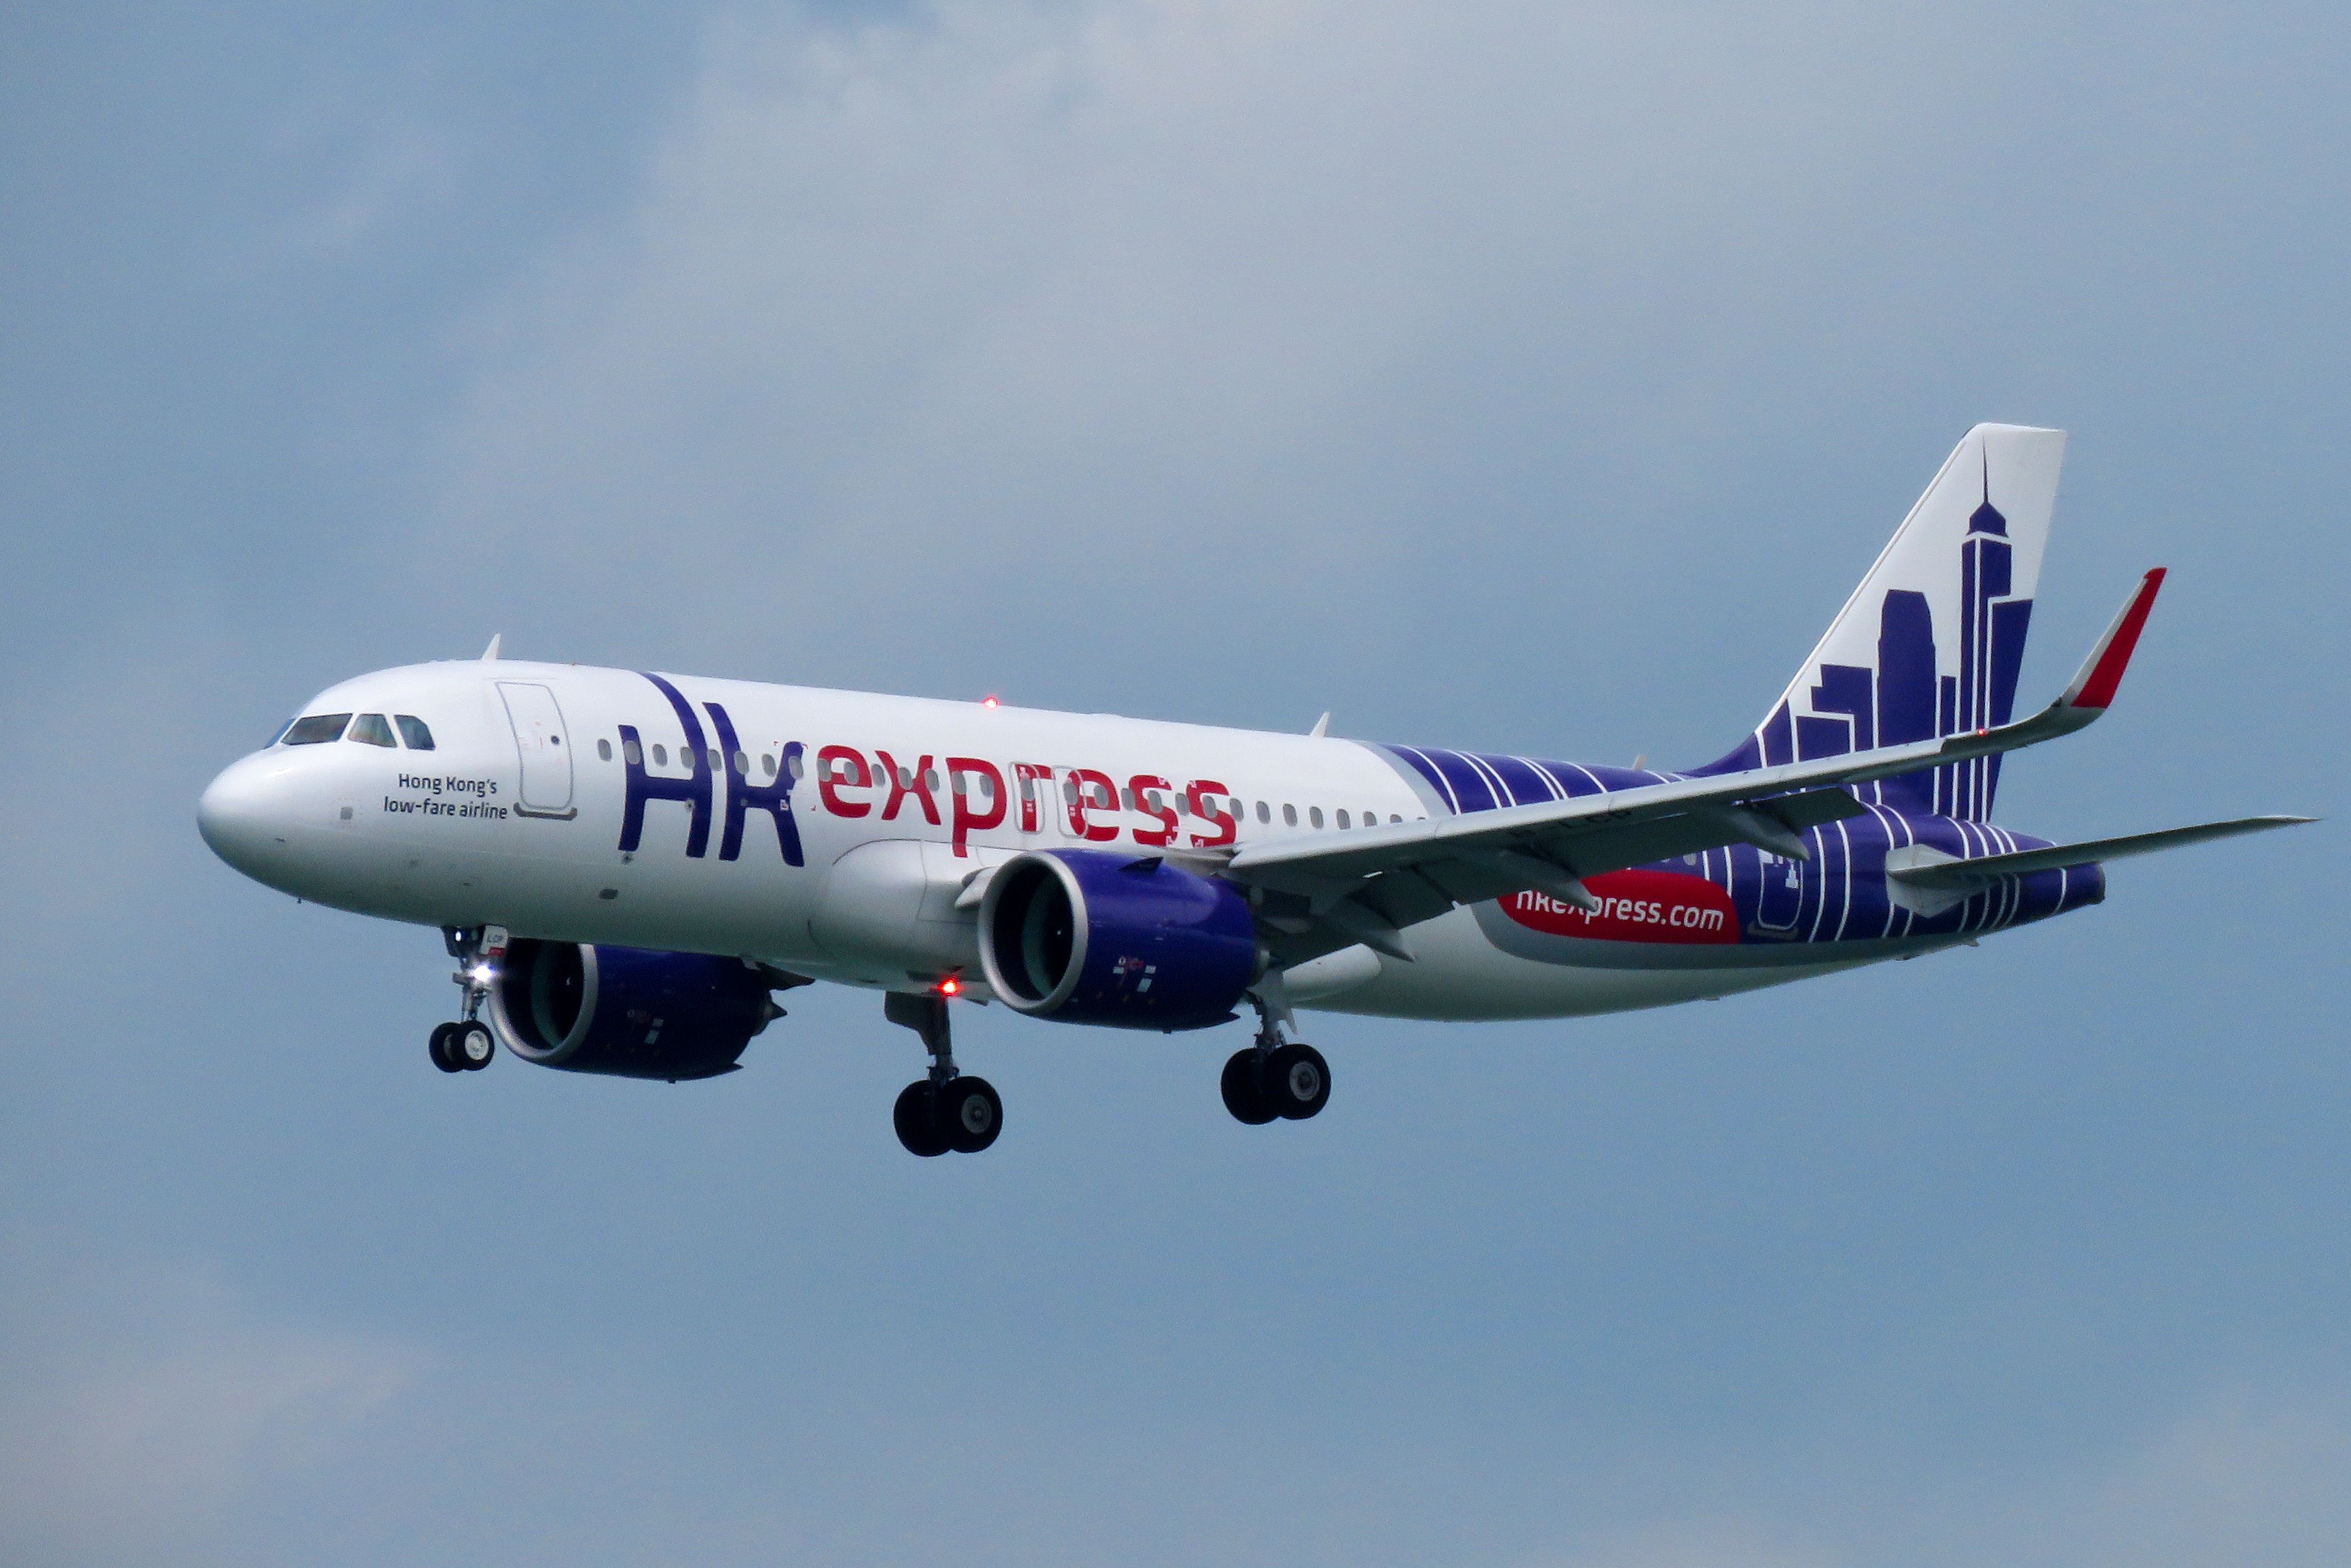 HK Express A320 flying in the sky.